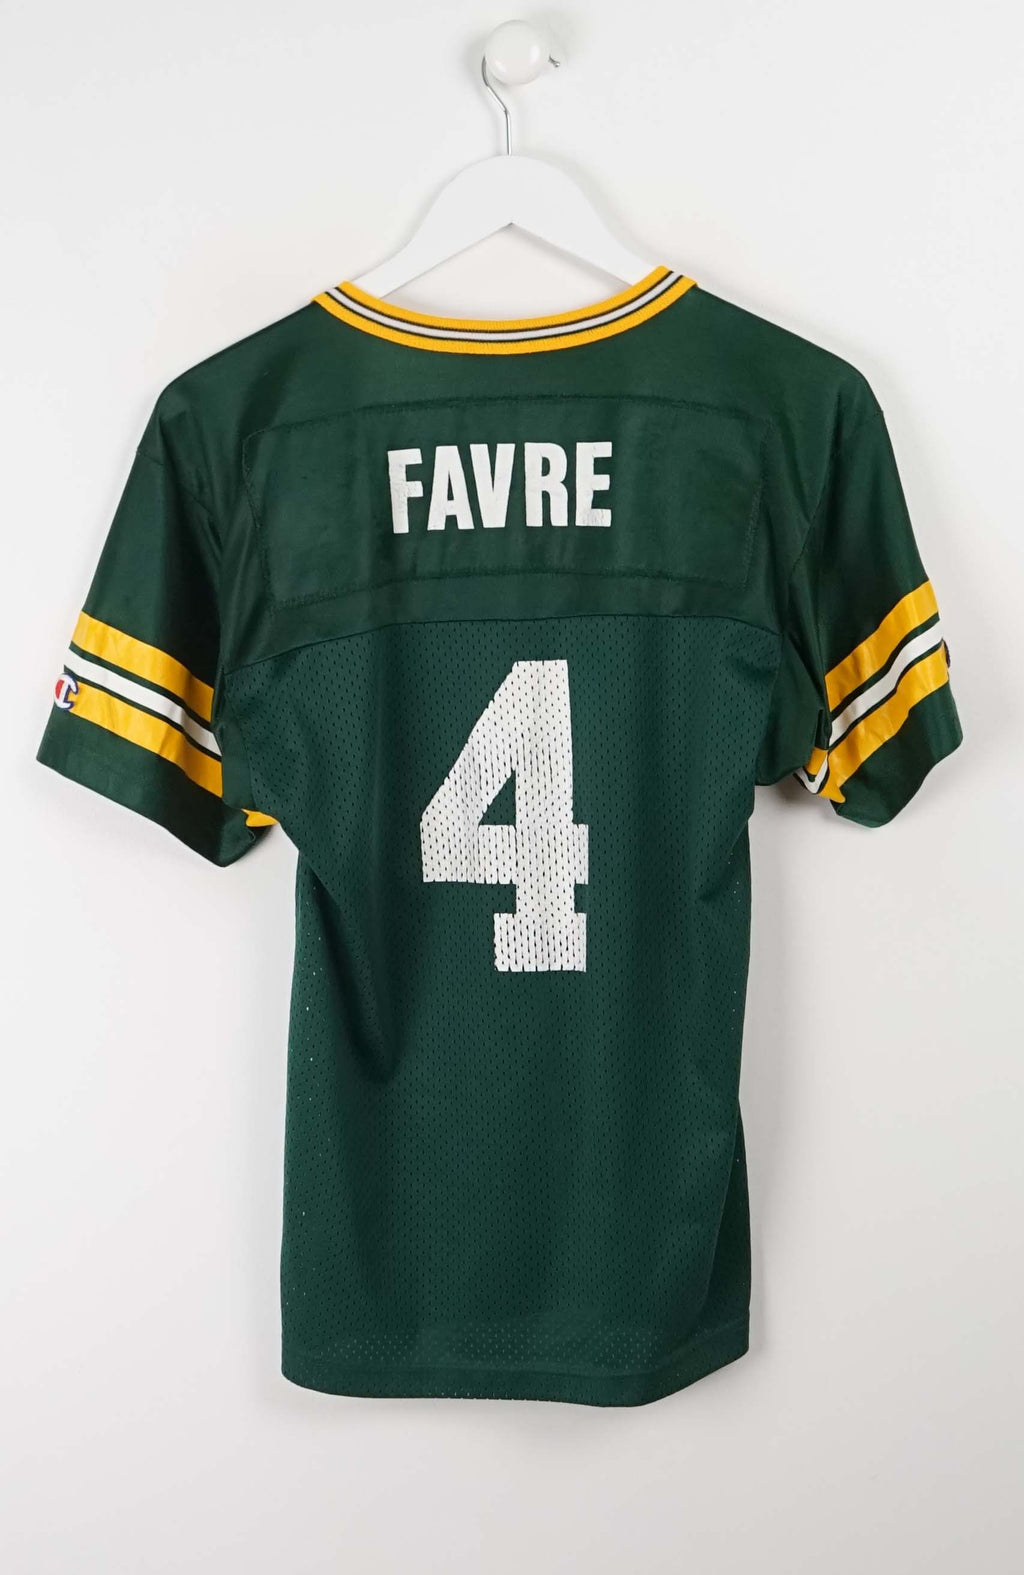 VINTAGE NFL CHAMPION GREENBAY PACKERS JERSEY (S)